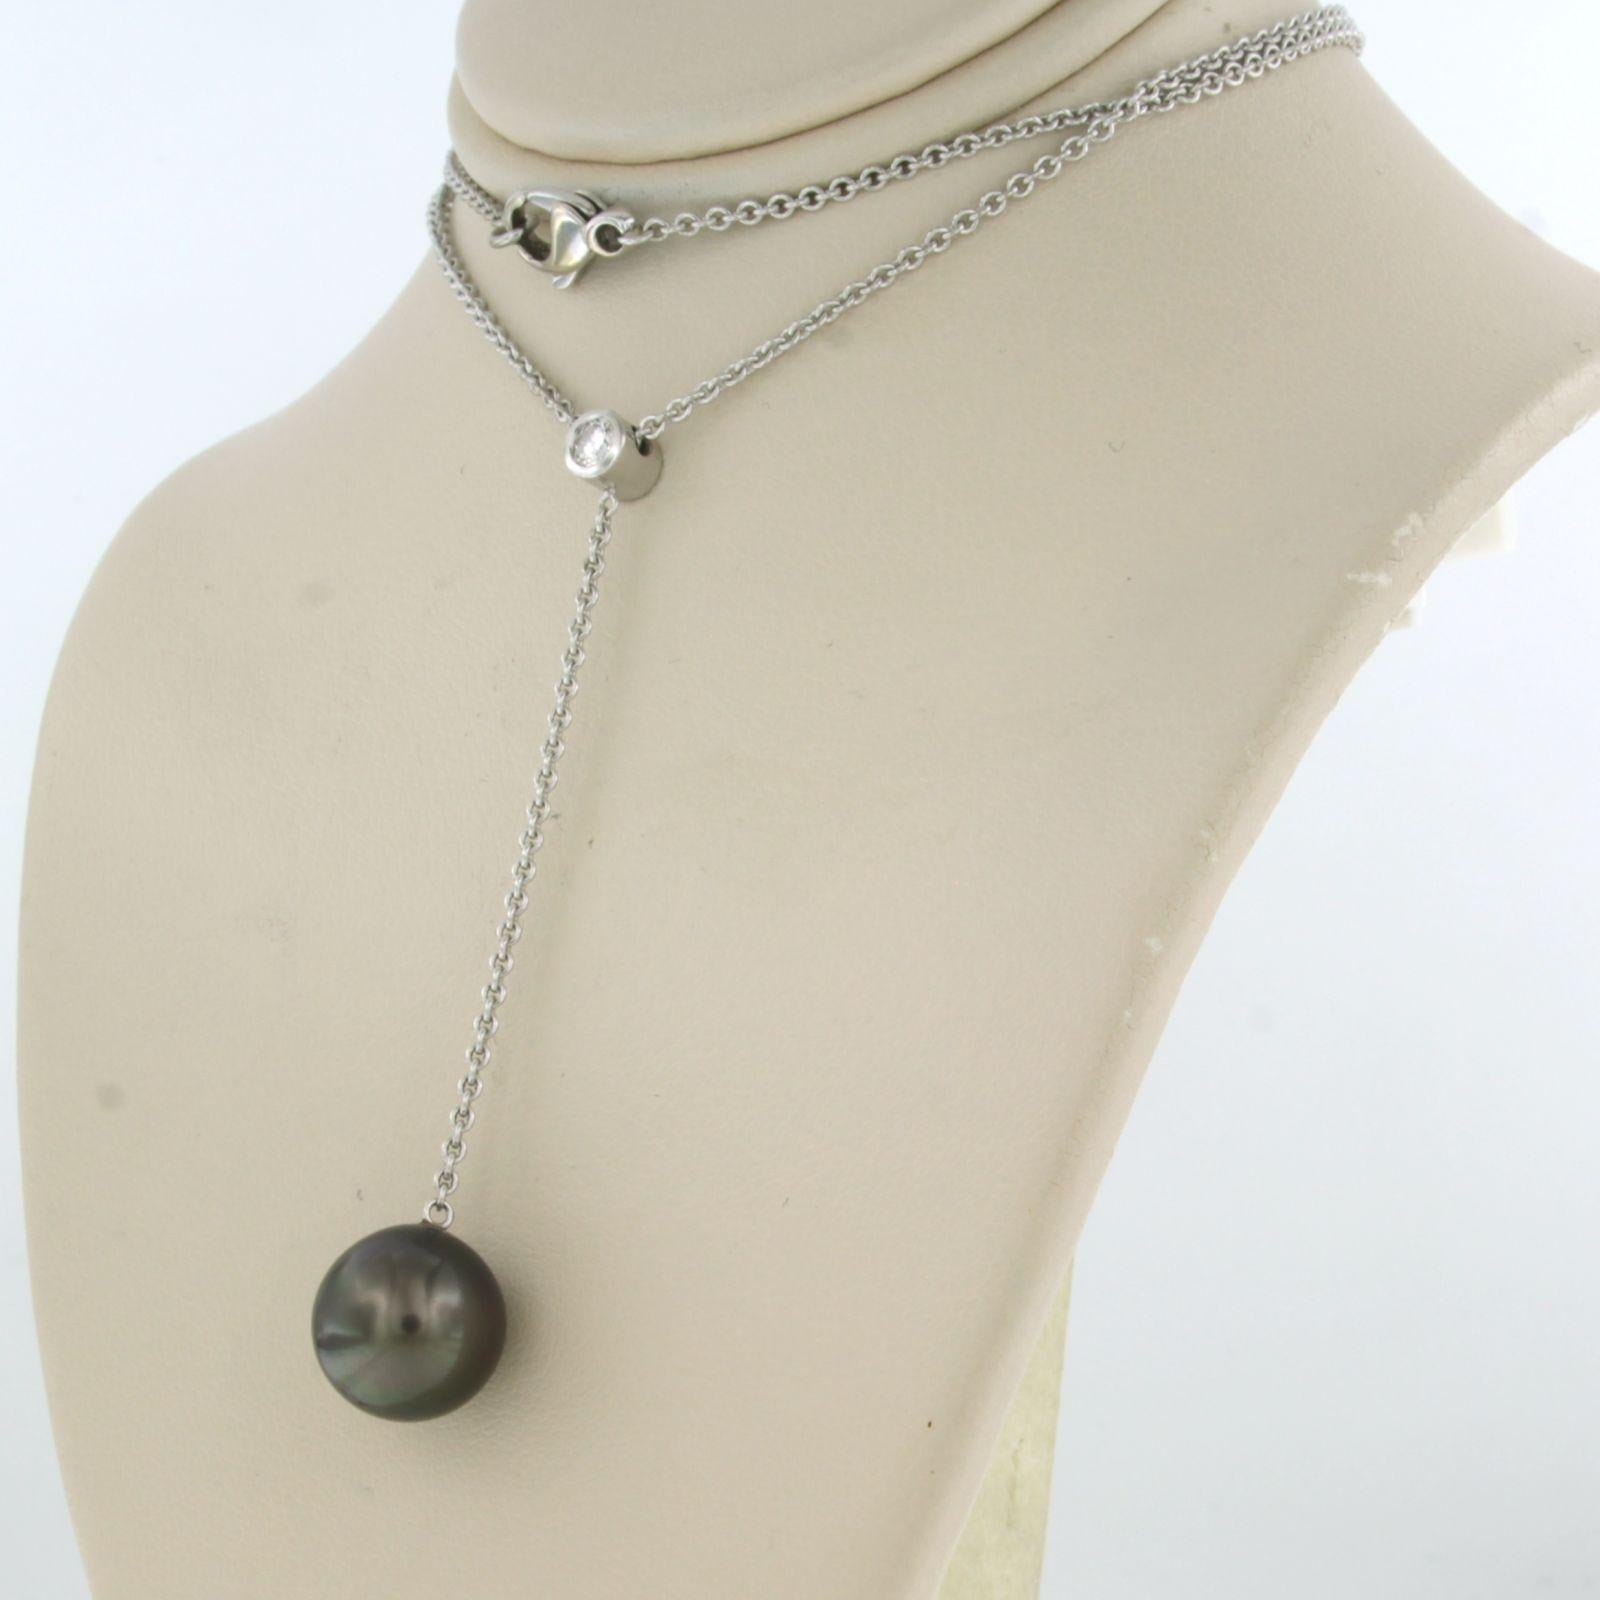 Brilliant Cut Necklace with pearl and diamonds 18k white gold